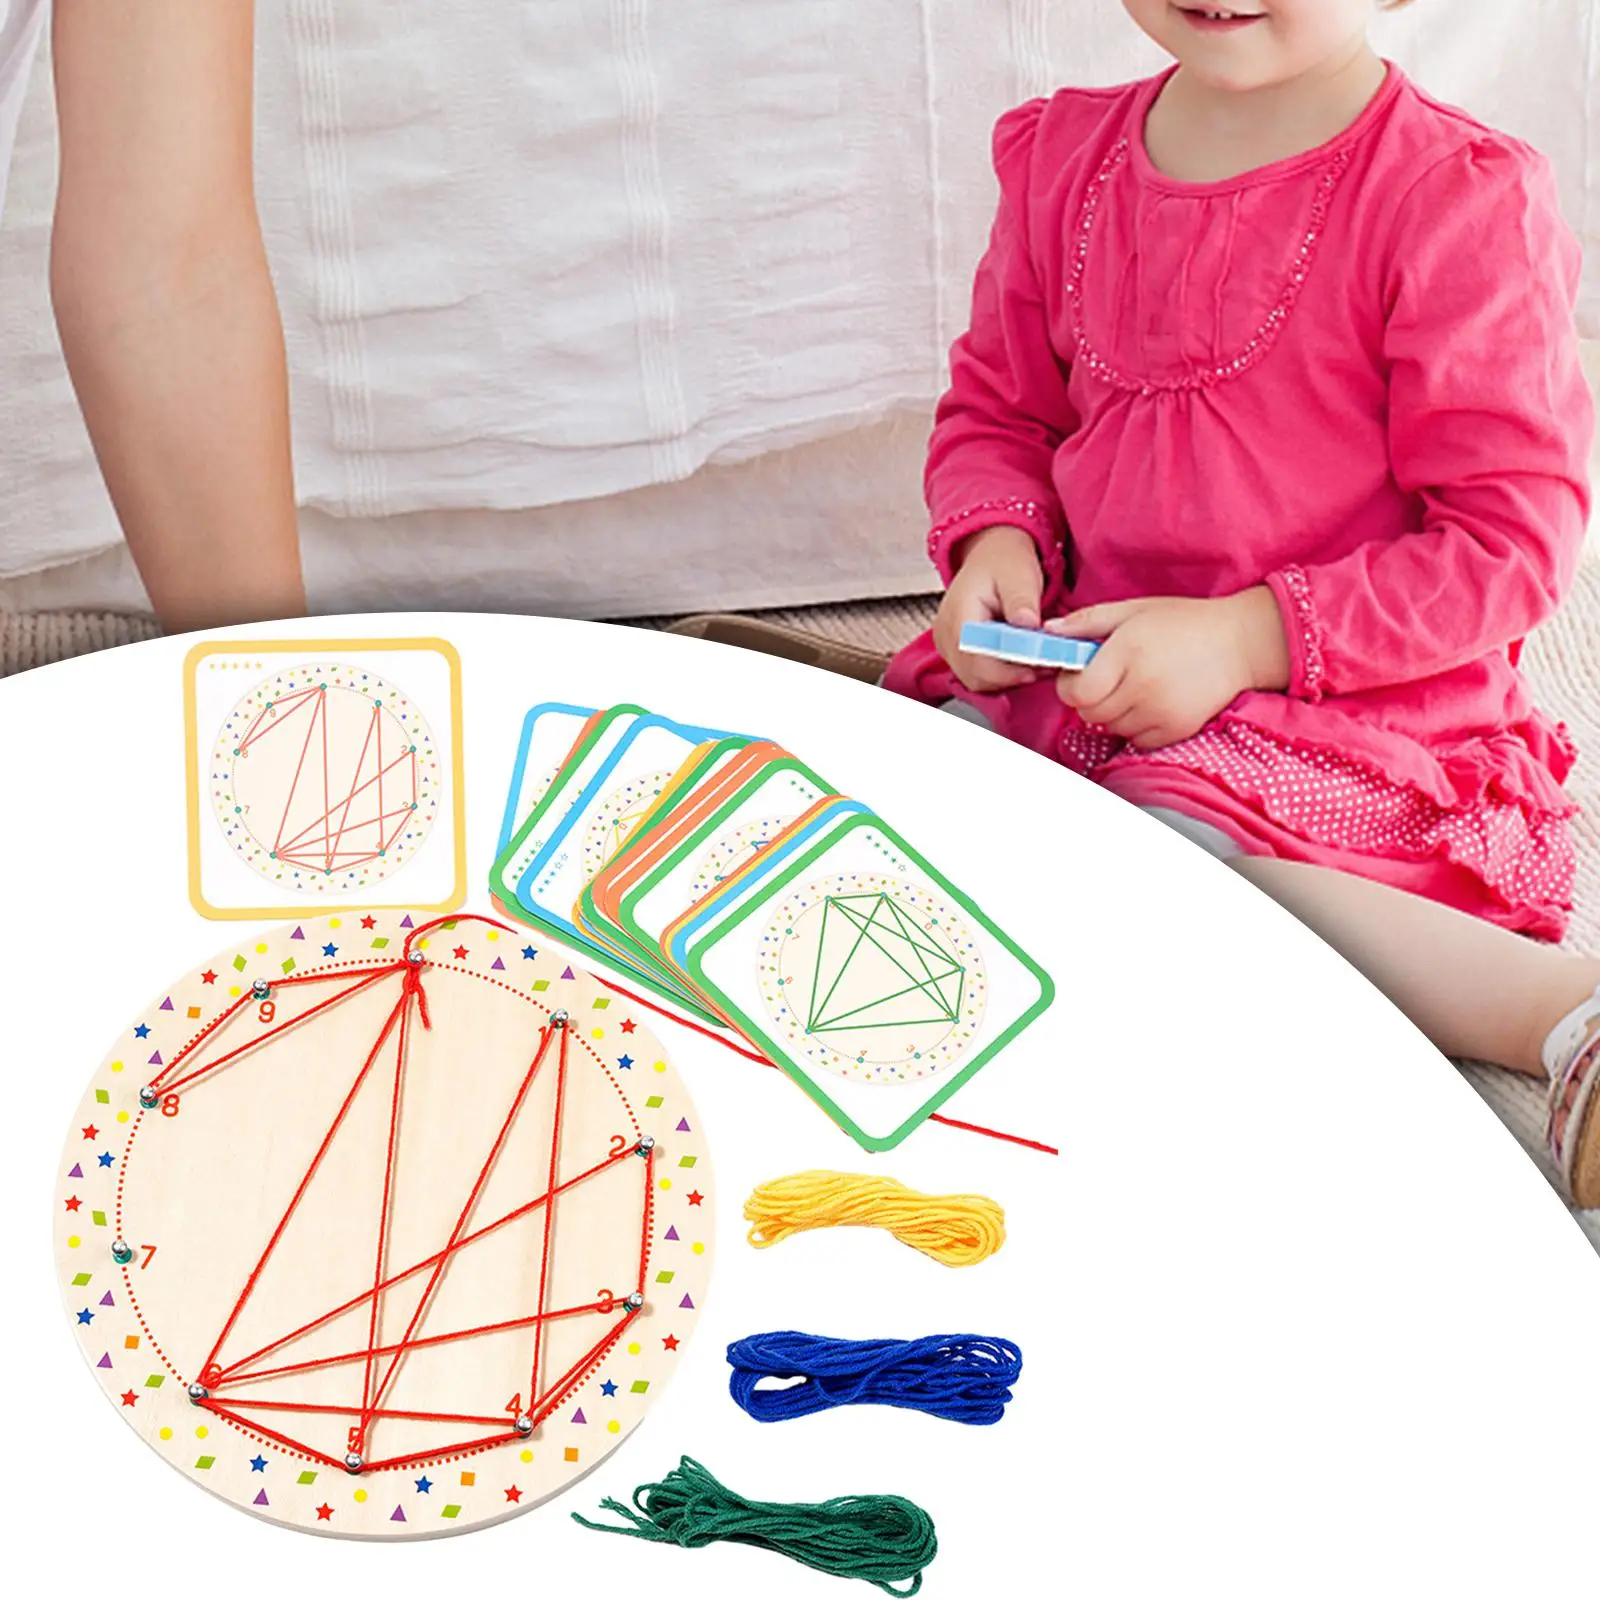 Wooden Threading Board with 20 Lacing Cards Shape Lacing Projects for Children Birthday Gift Ages 3 4 5 Years Old Activity